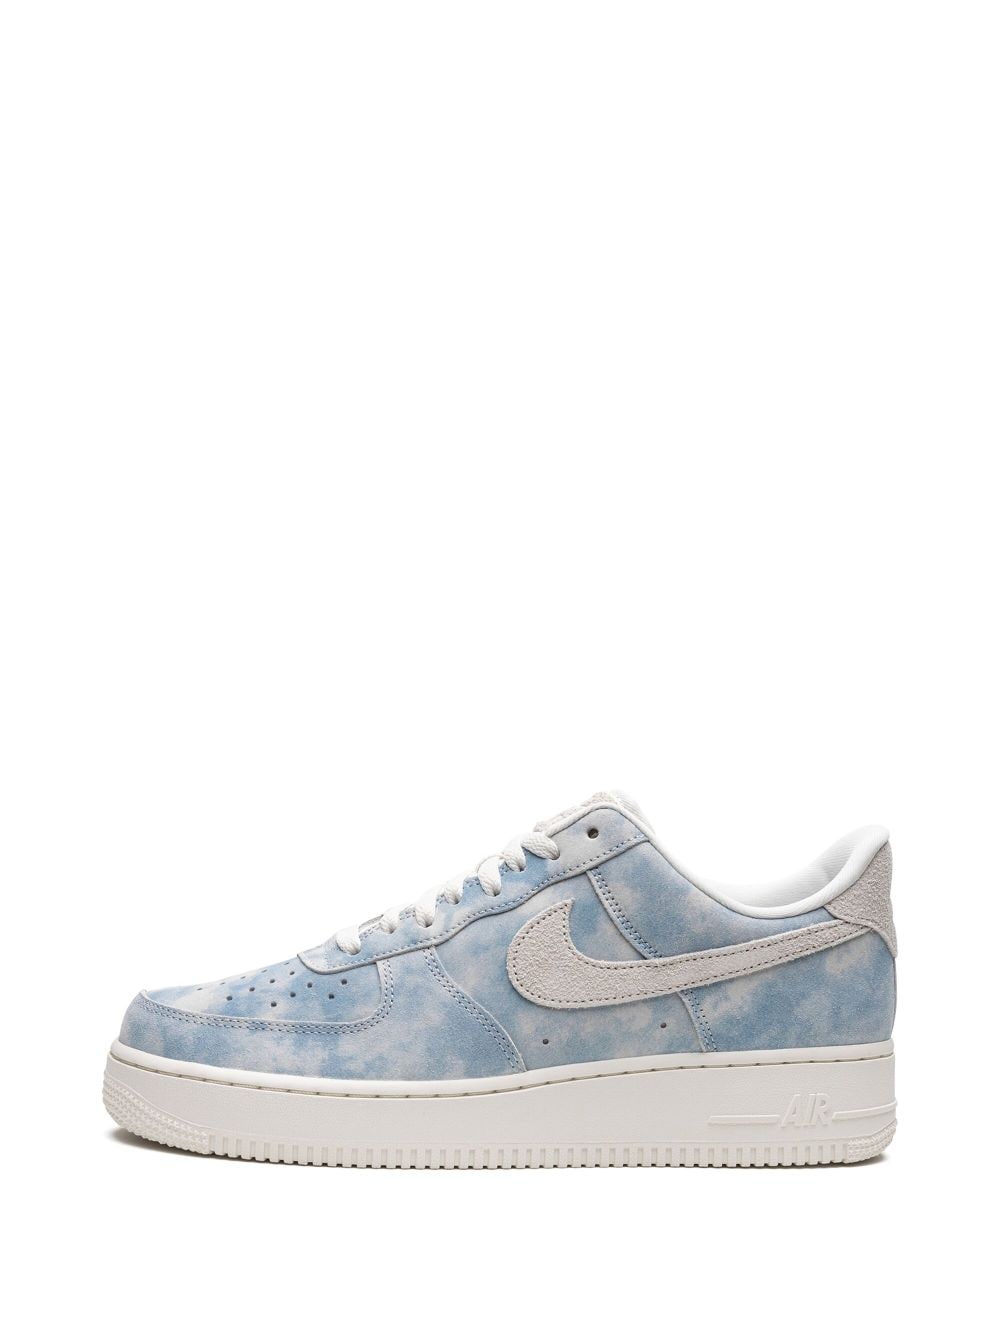 This Nike Air Force 1 Low Makes Us Feel Like We're On Cloud 9